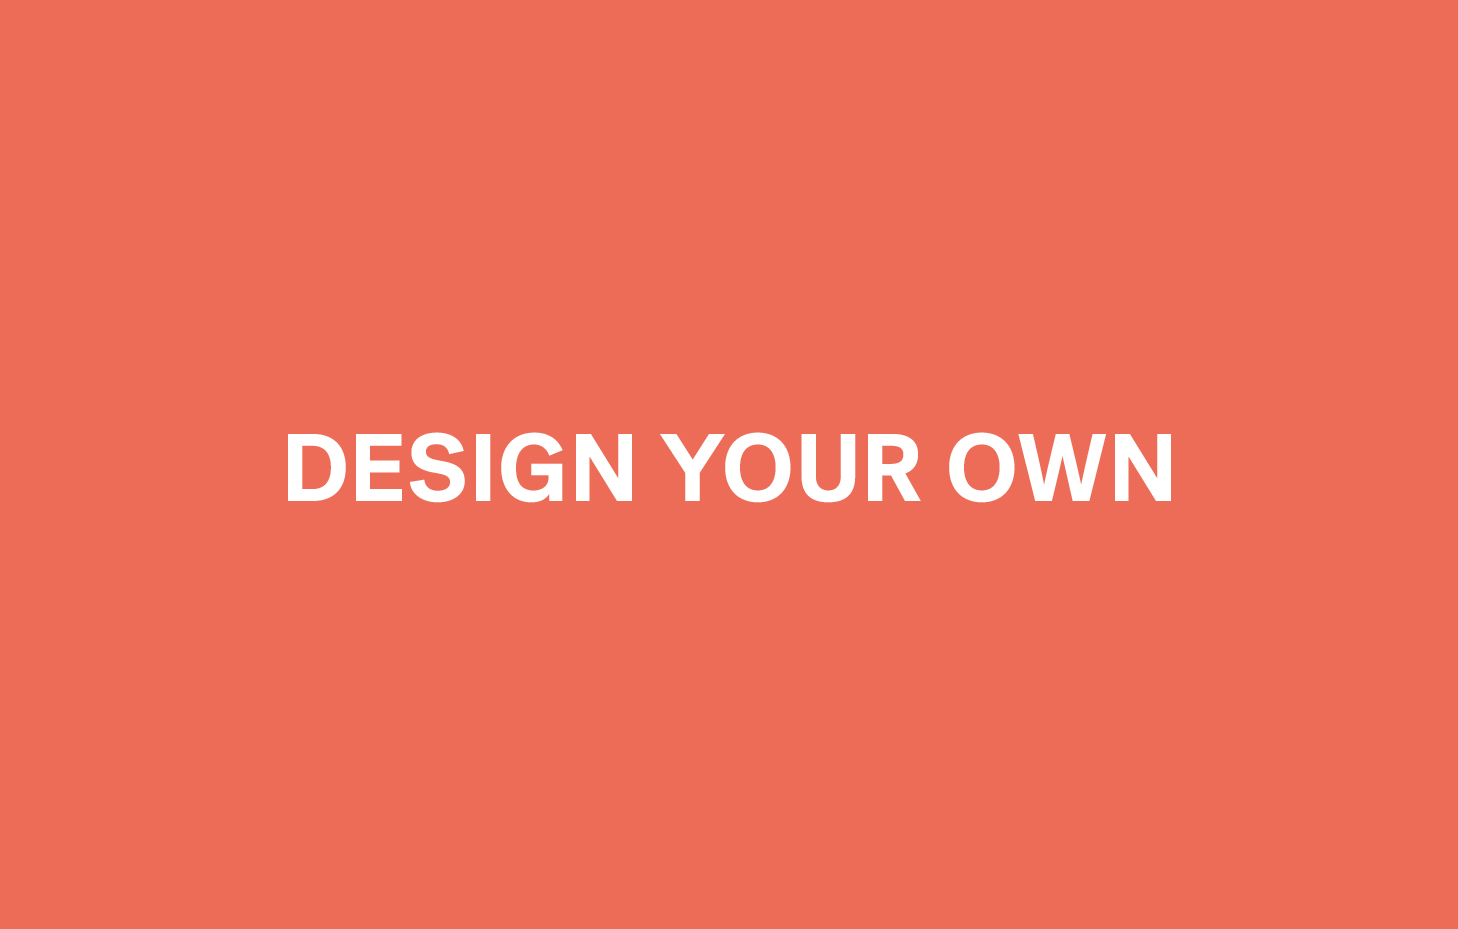 Design your own